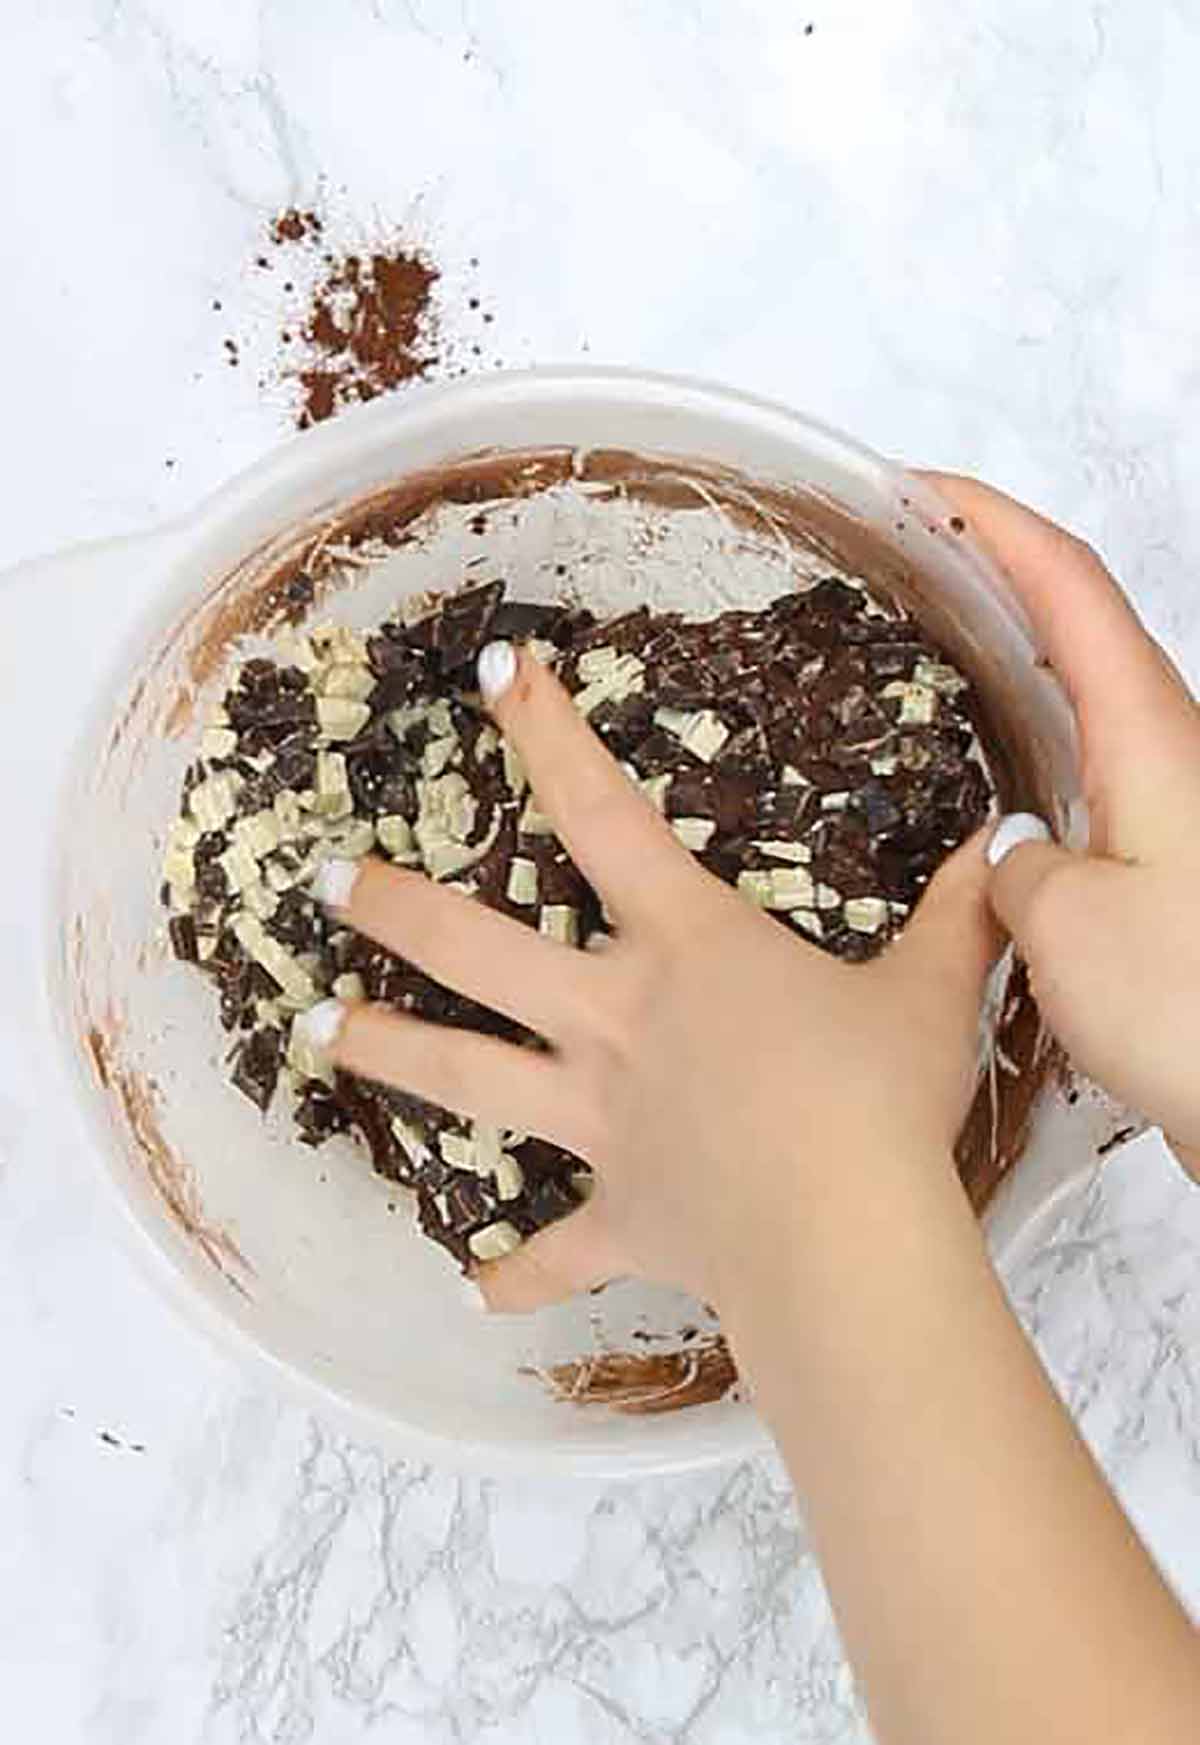 Folding Chocolate Chips Into Cookie Dough